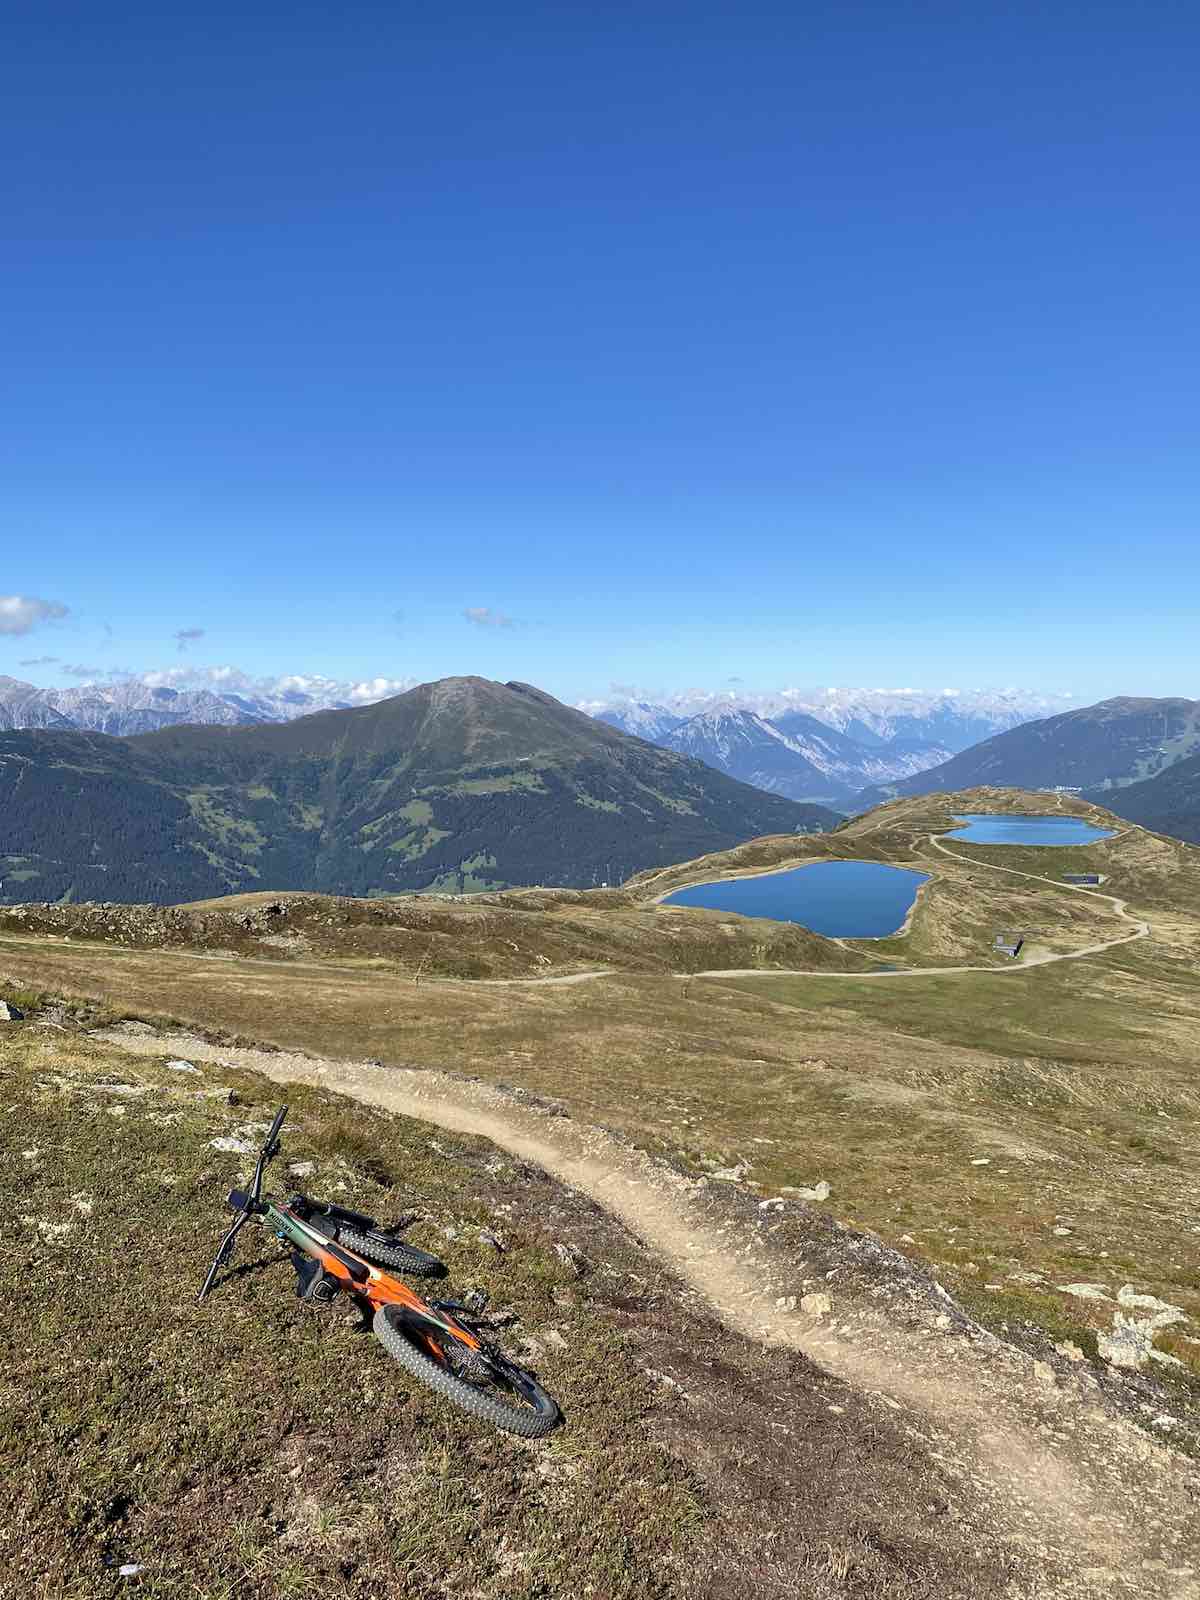 bikerumor pic of the day orange mountain bike is laying beside a dirt trail on a rocky plain leading up to a lake and snow capped mountains beyond with clear blue skies in the distance.